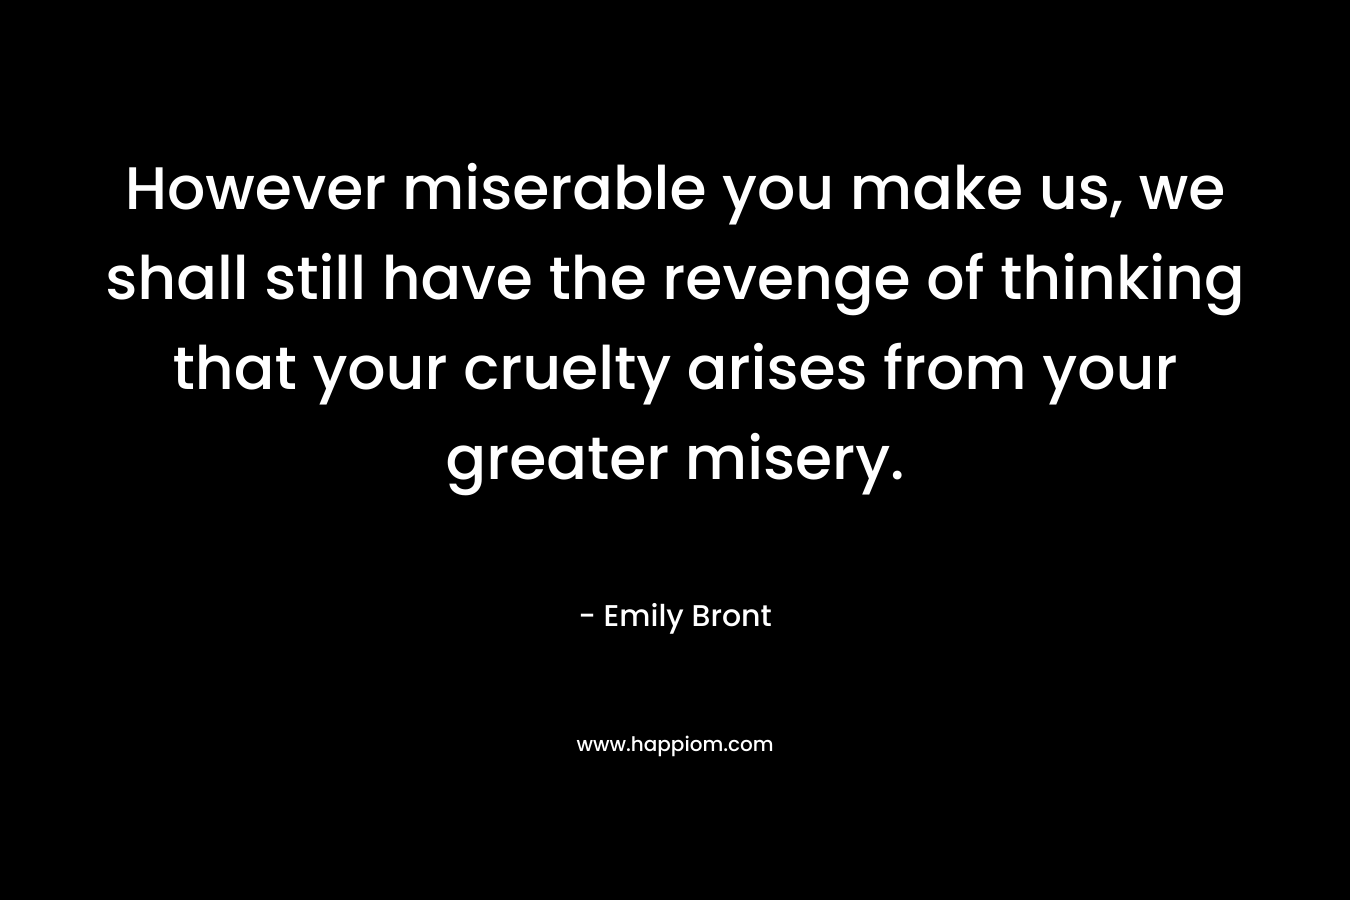 However miserable you make us, we shall still have the revenge of thinking that your cruelty arises from your greater misery.